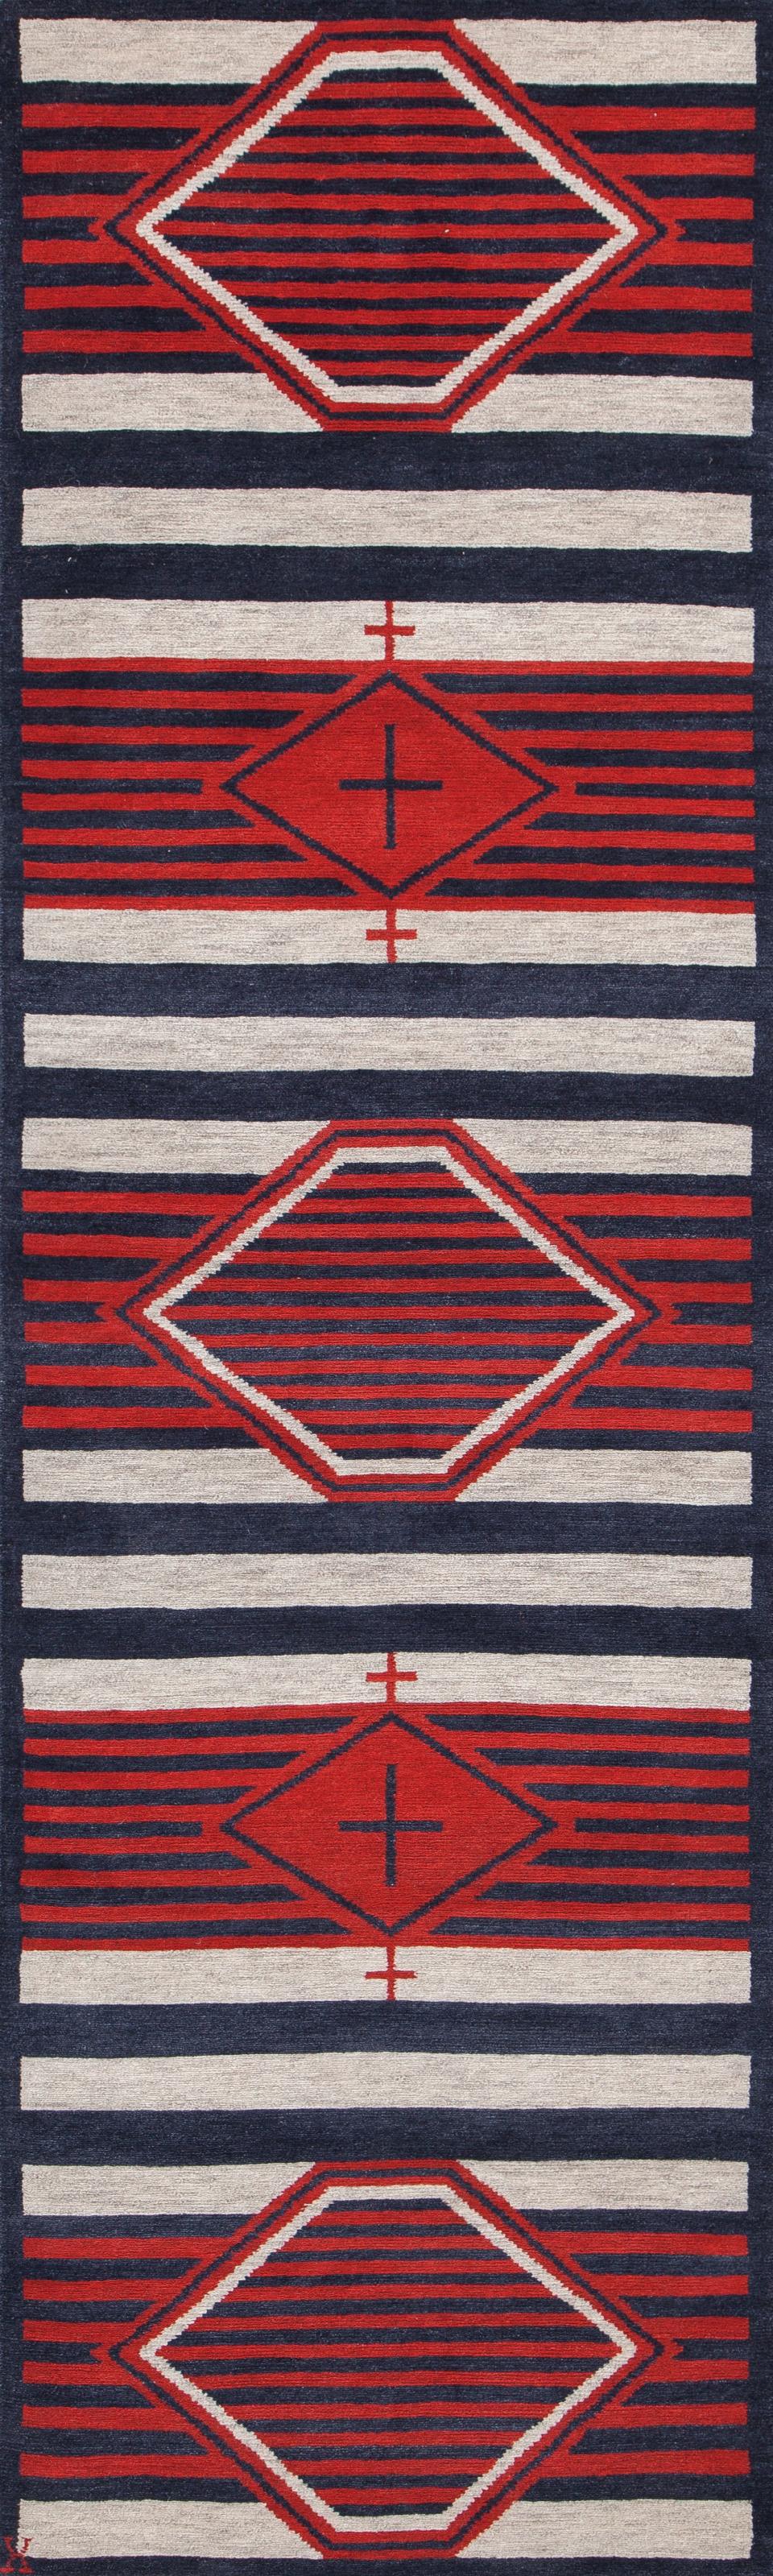 Rug by New Moon Rugs